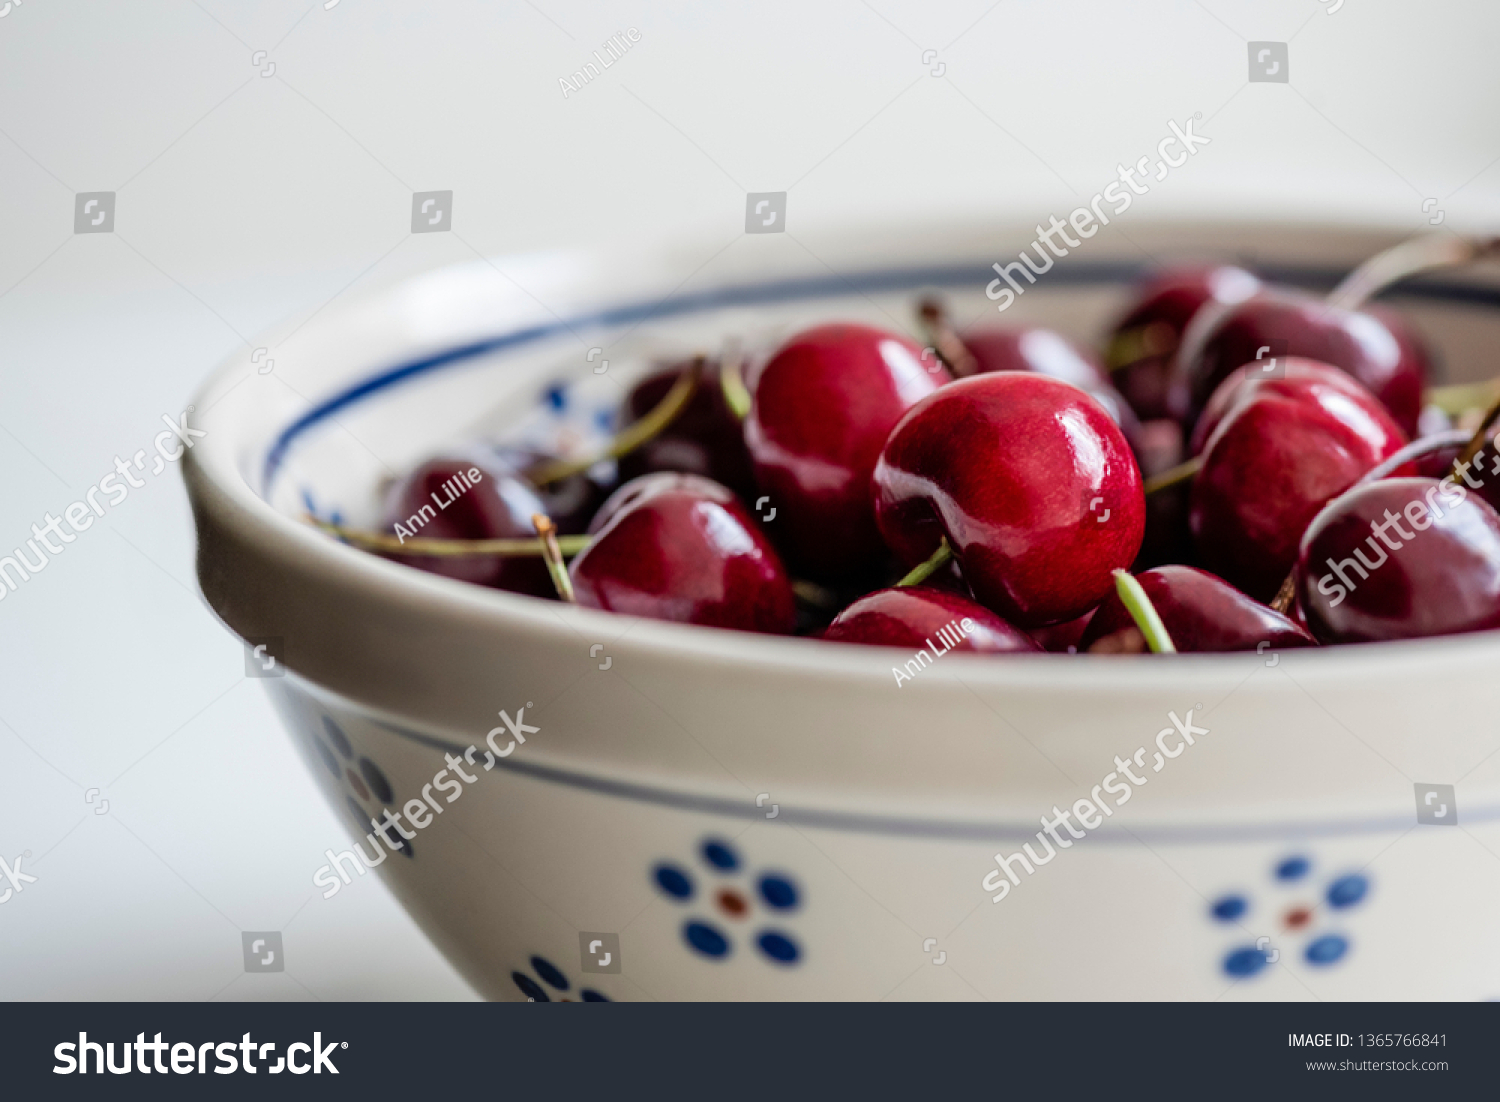 Sweet, ripe, dark red bing cherries on stems are grouped in an off-white, round Polish pottery bowl for a morning or afternoon snack. Macro, close-up photo highlighting one shiny cherry. #1365766841